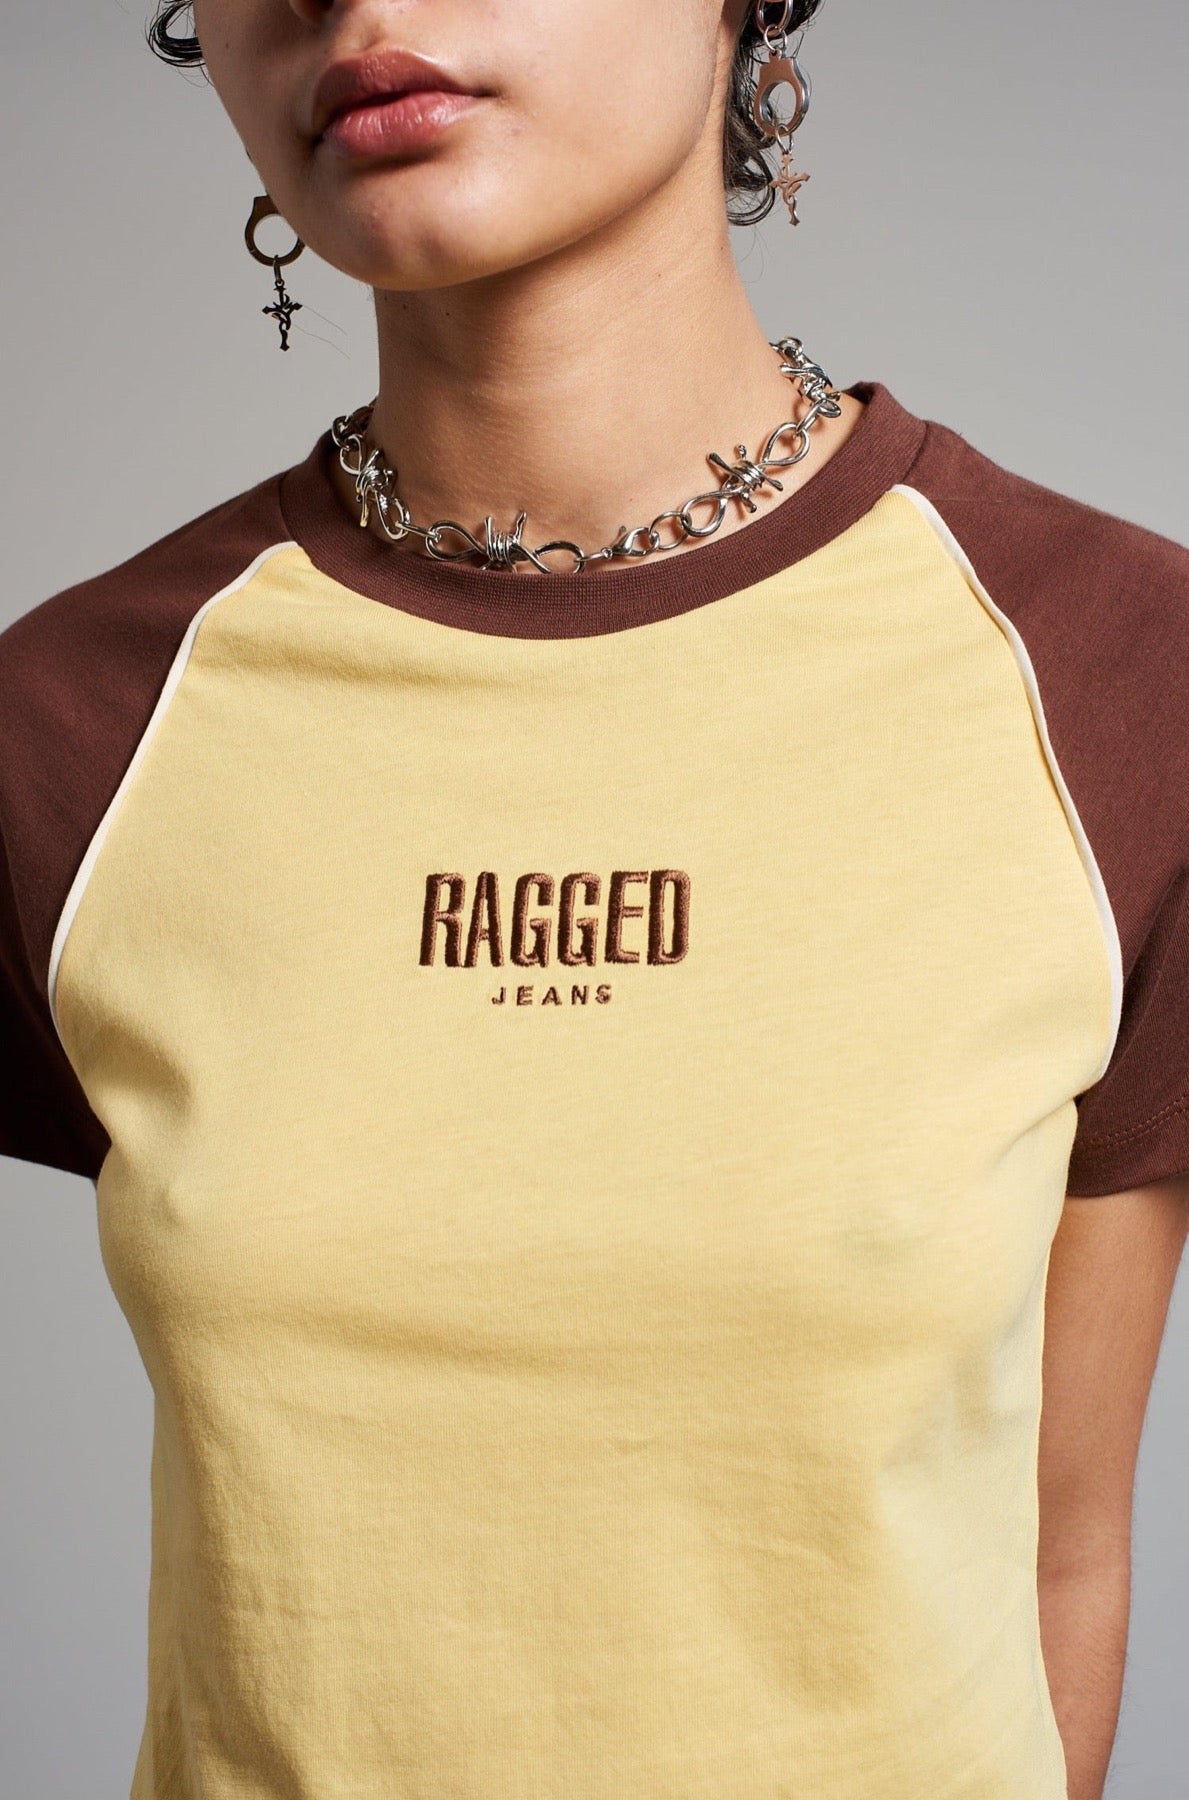 Cassette Tee Ragged Jeans